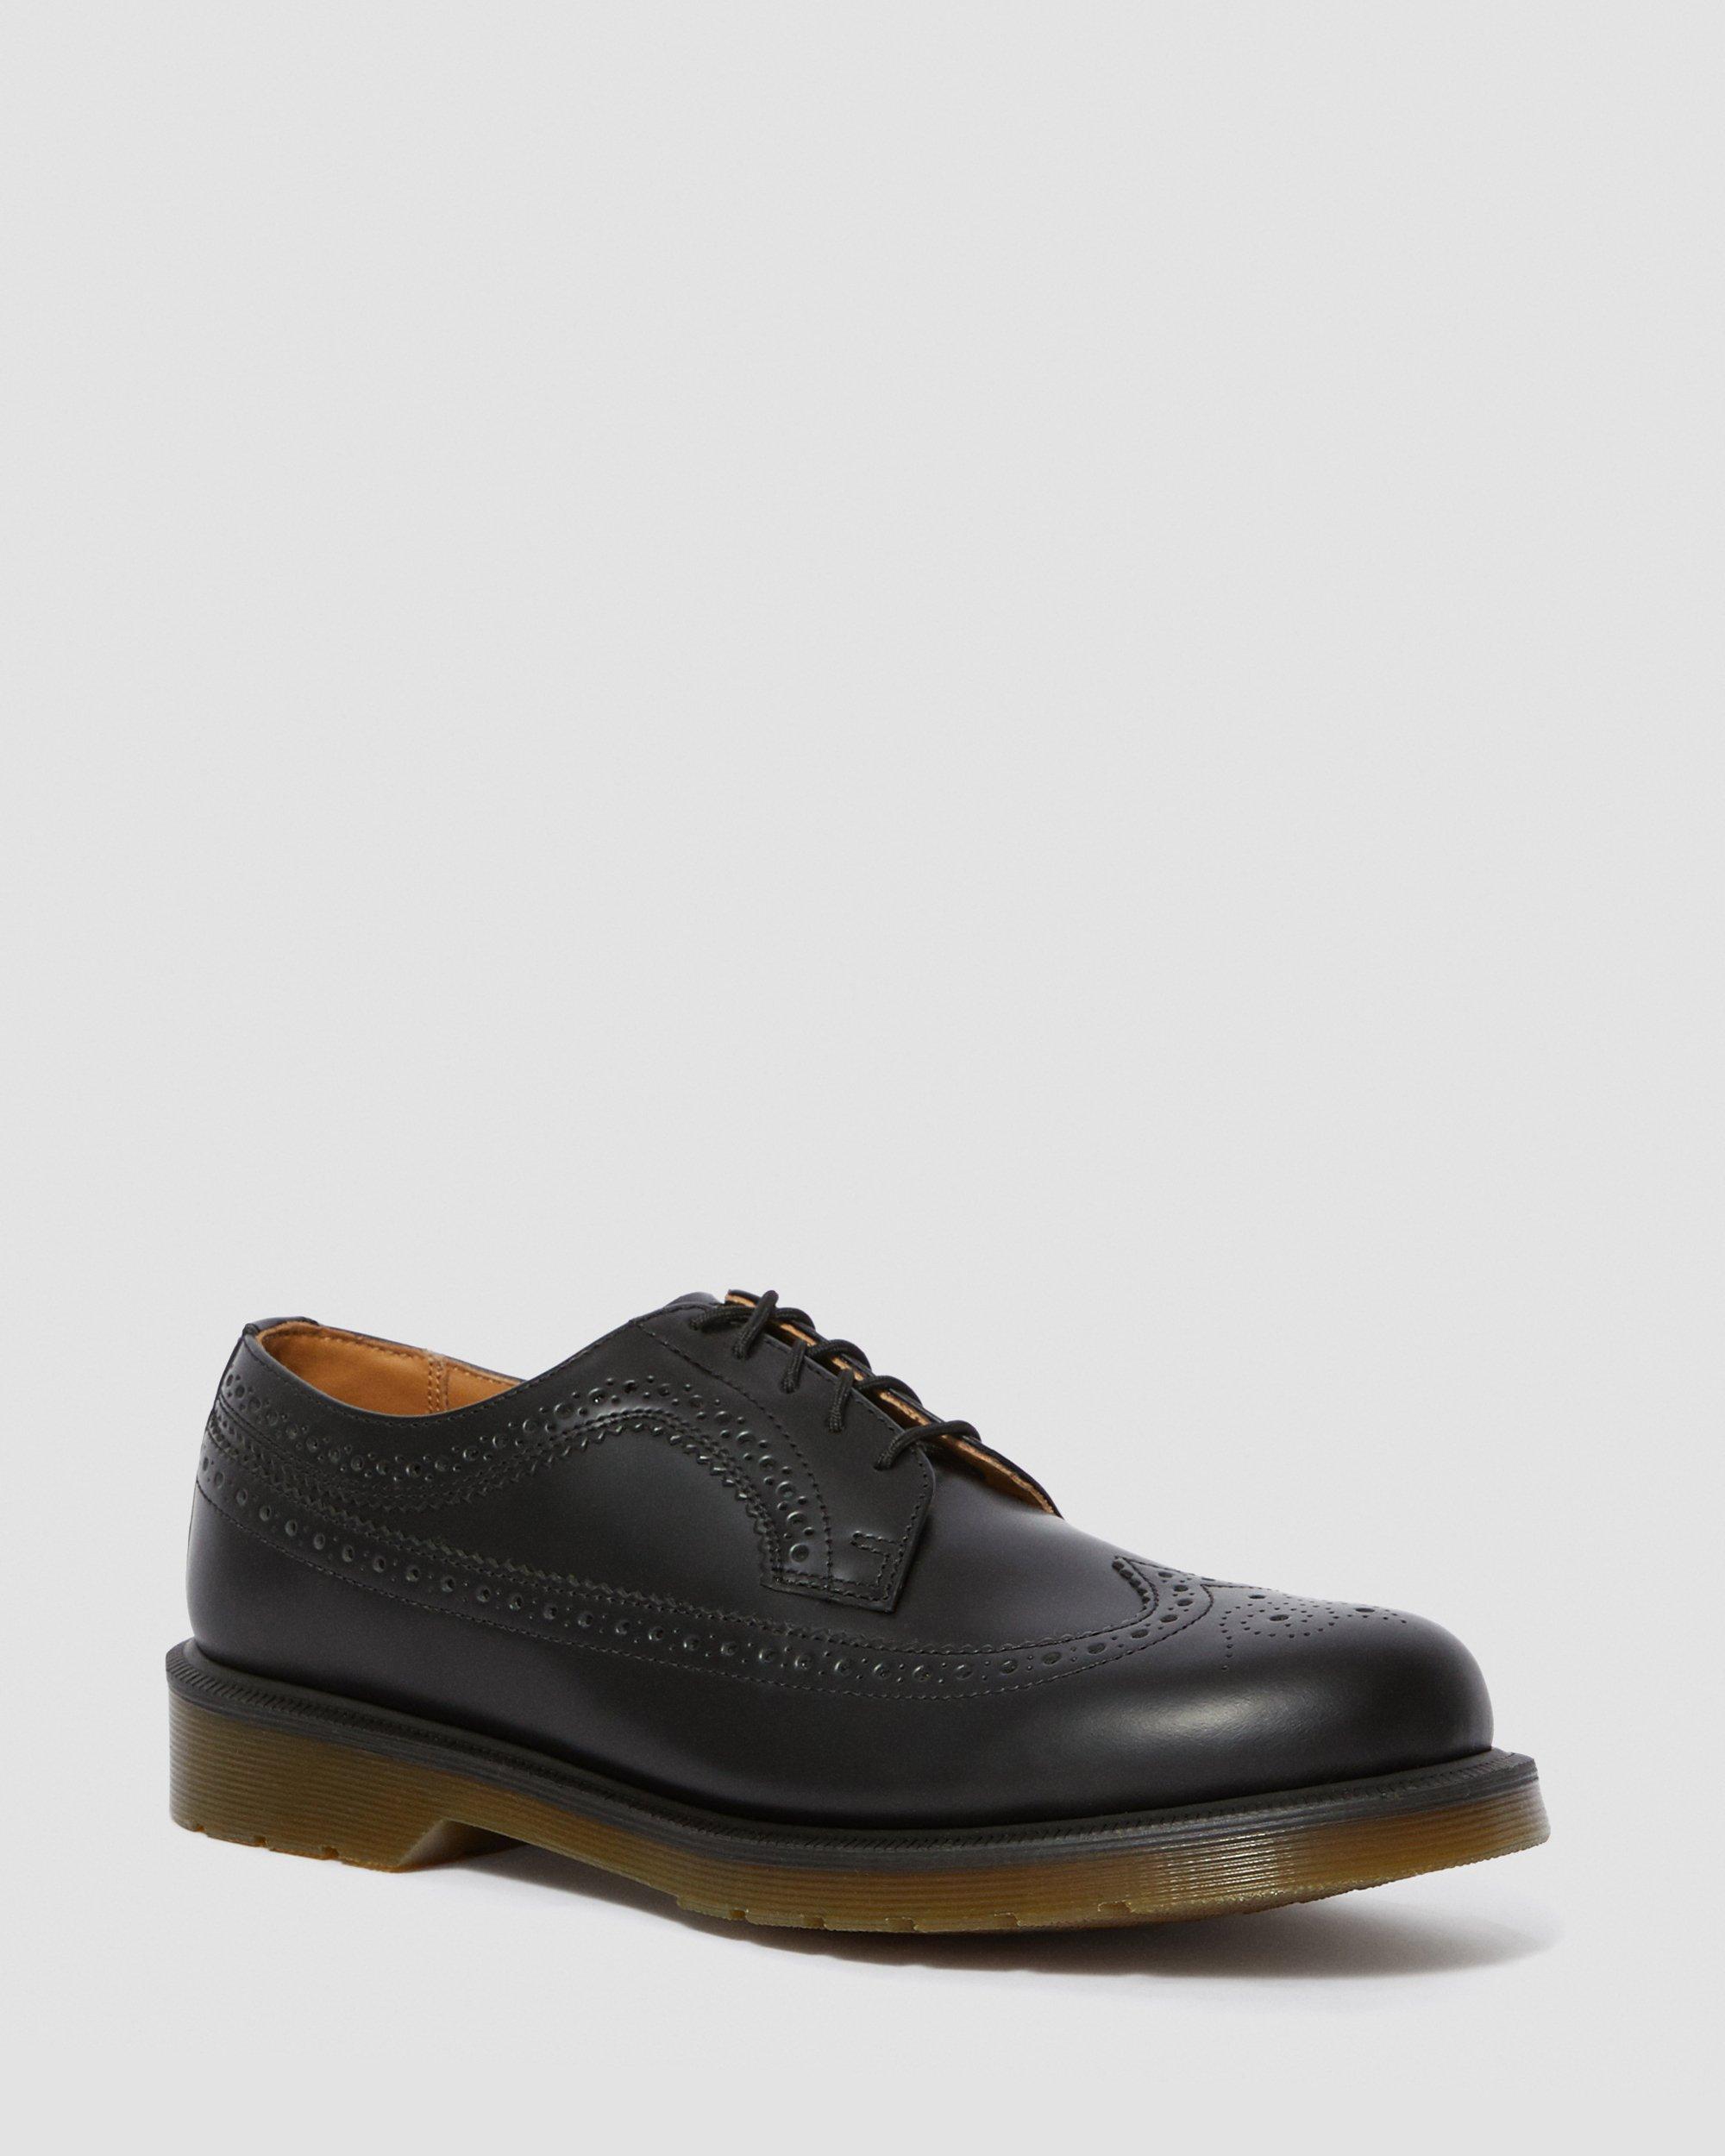 3989 SMOOTH LEATHER BROGUE SHOES | Dr 